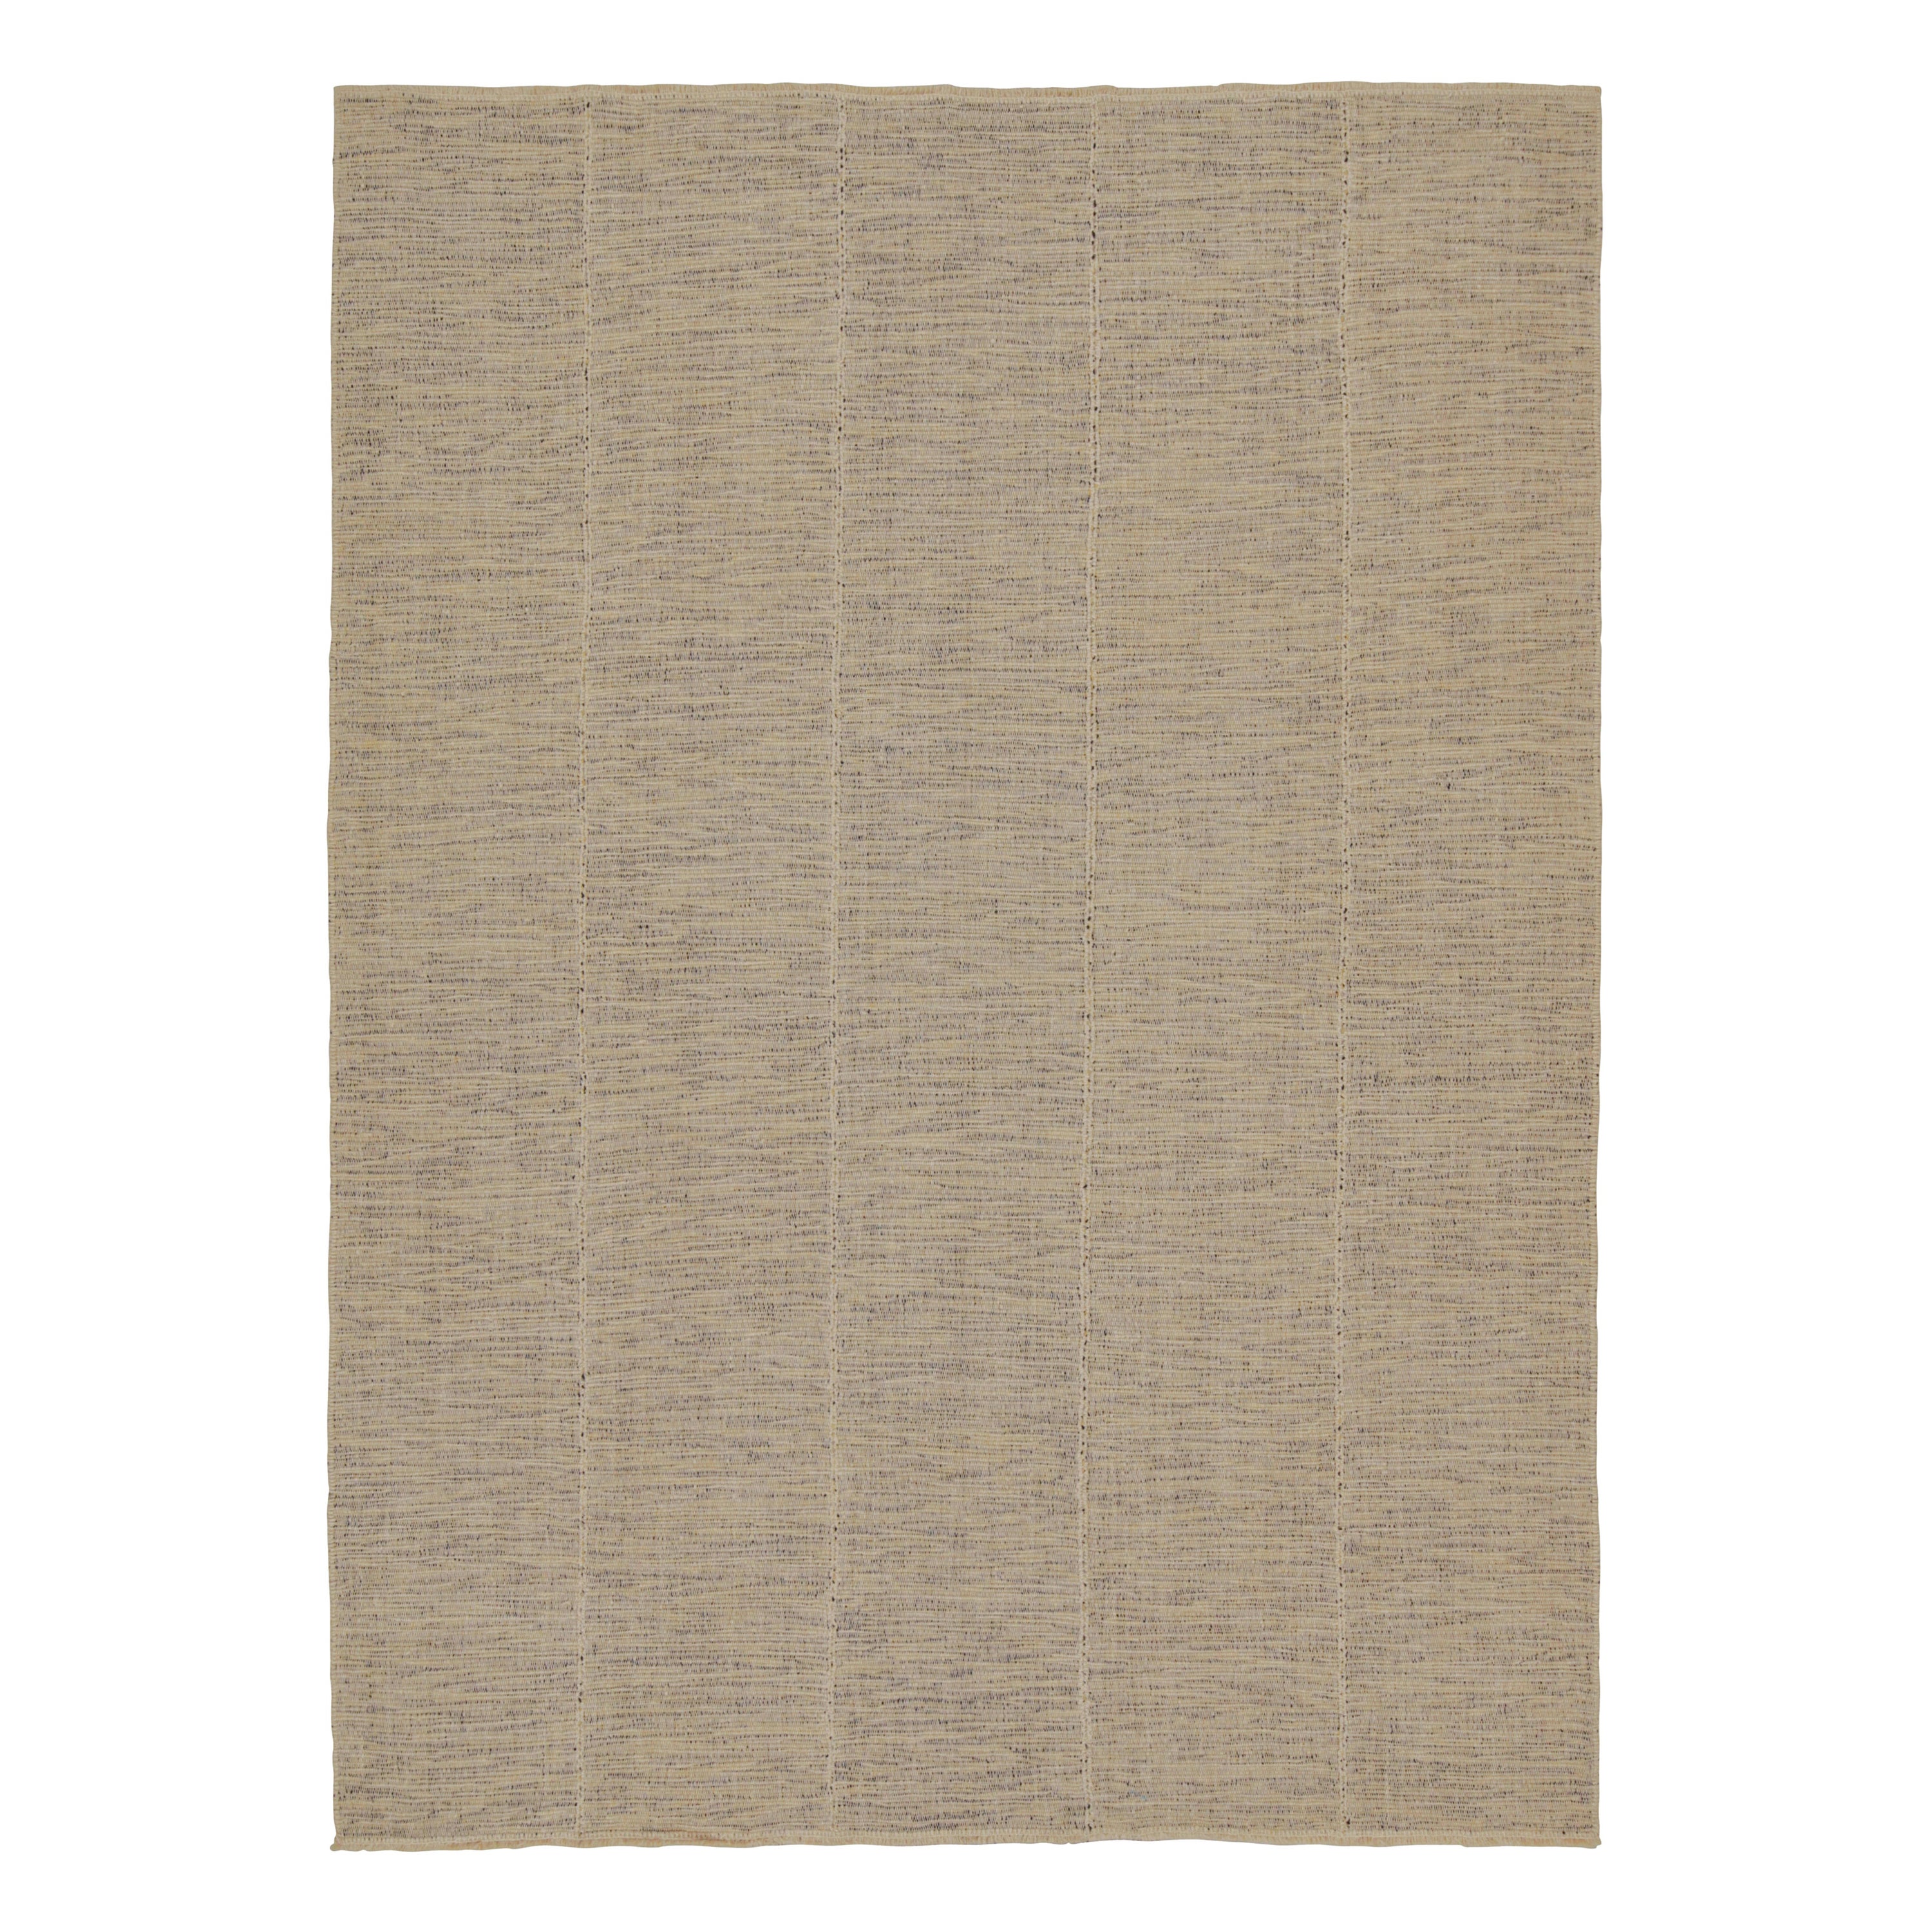 Rug & Kilim’s Contemporary Kilim Rug in Beige with Black and Yellow Accents